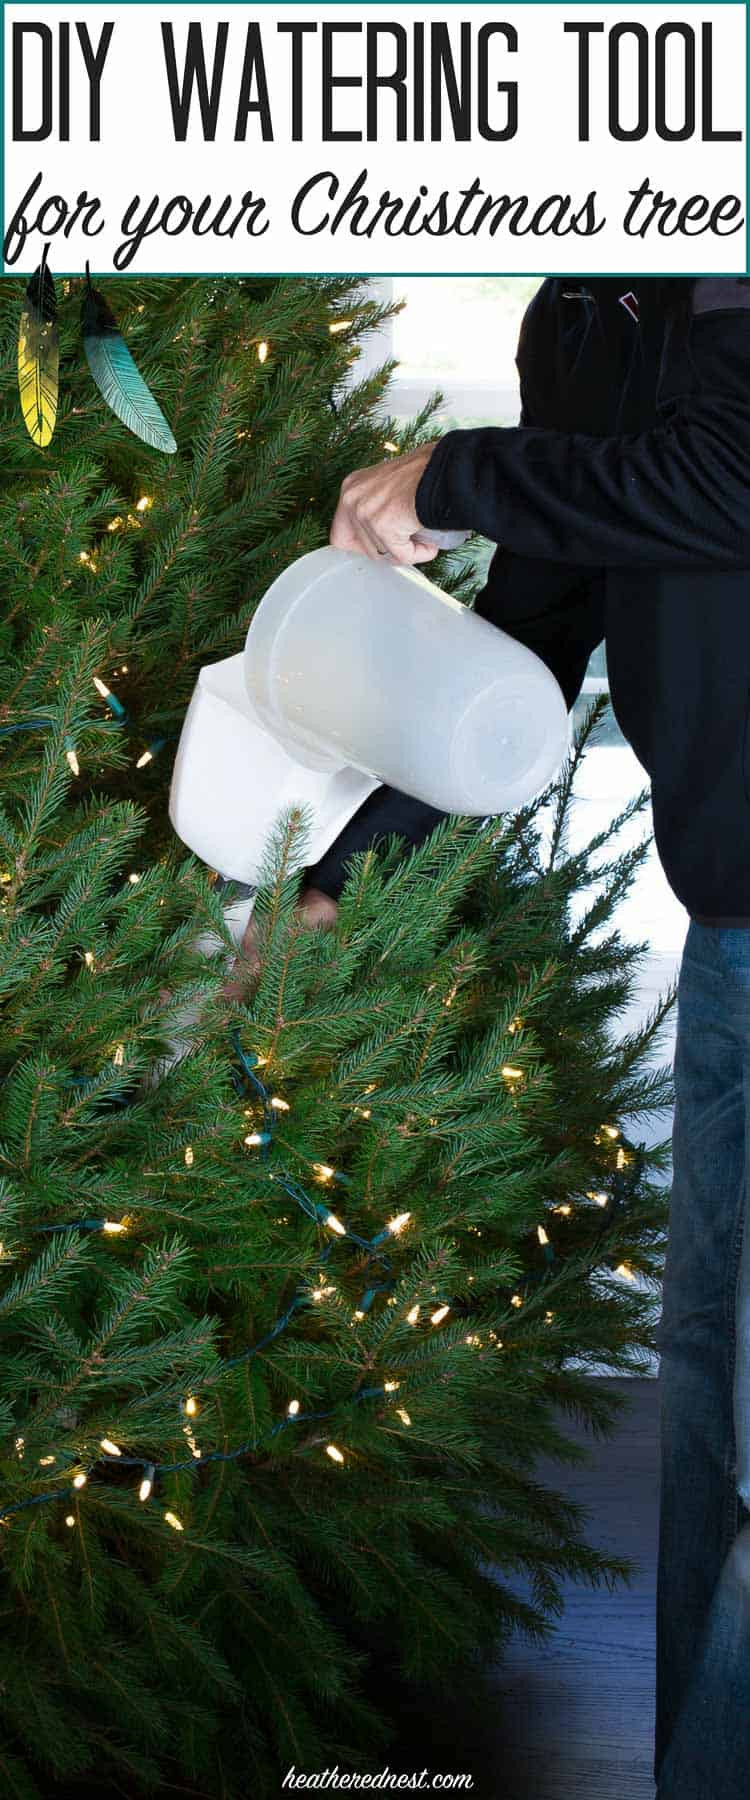 DIY Christmas Tree Watering System
 How to water a Christmas tree An EASY DIY tool